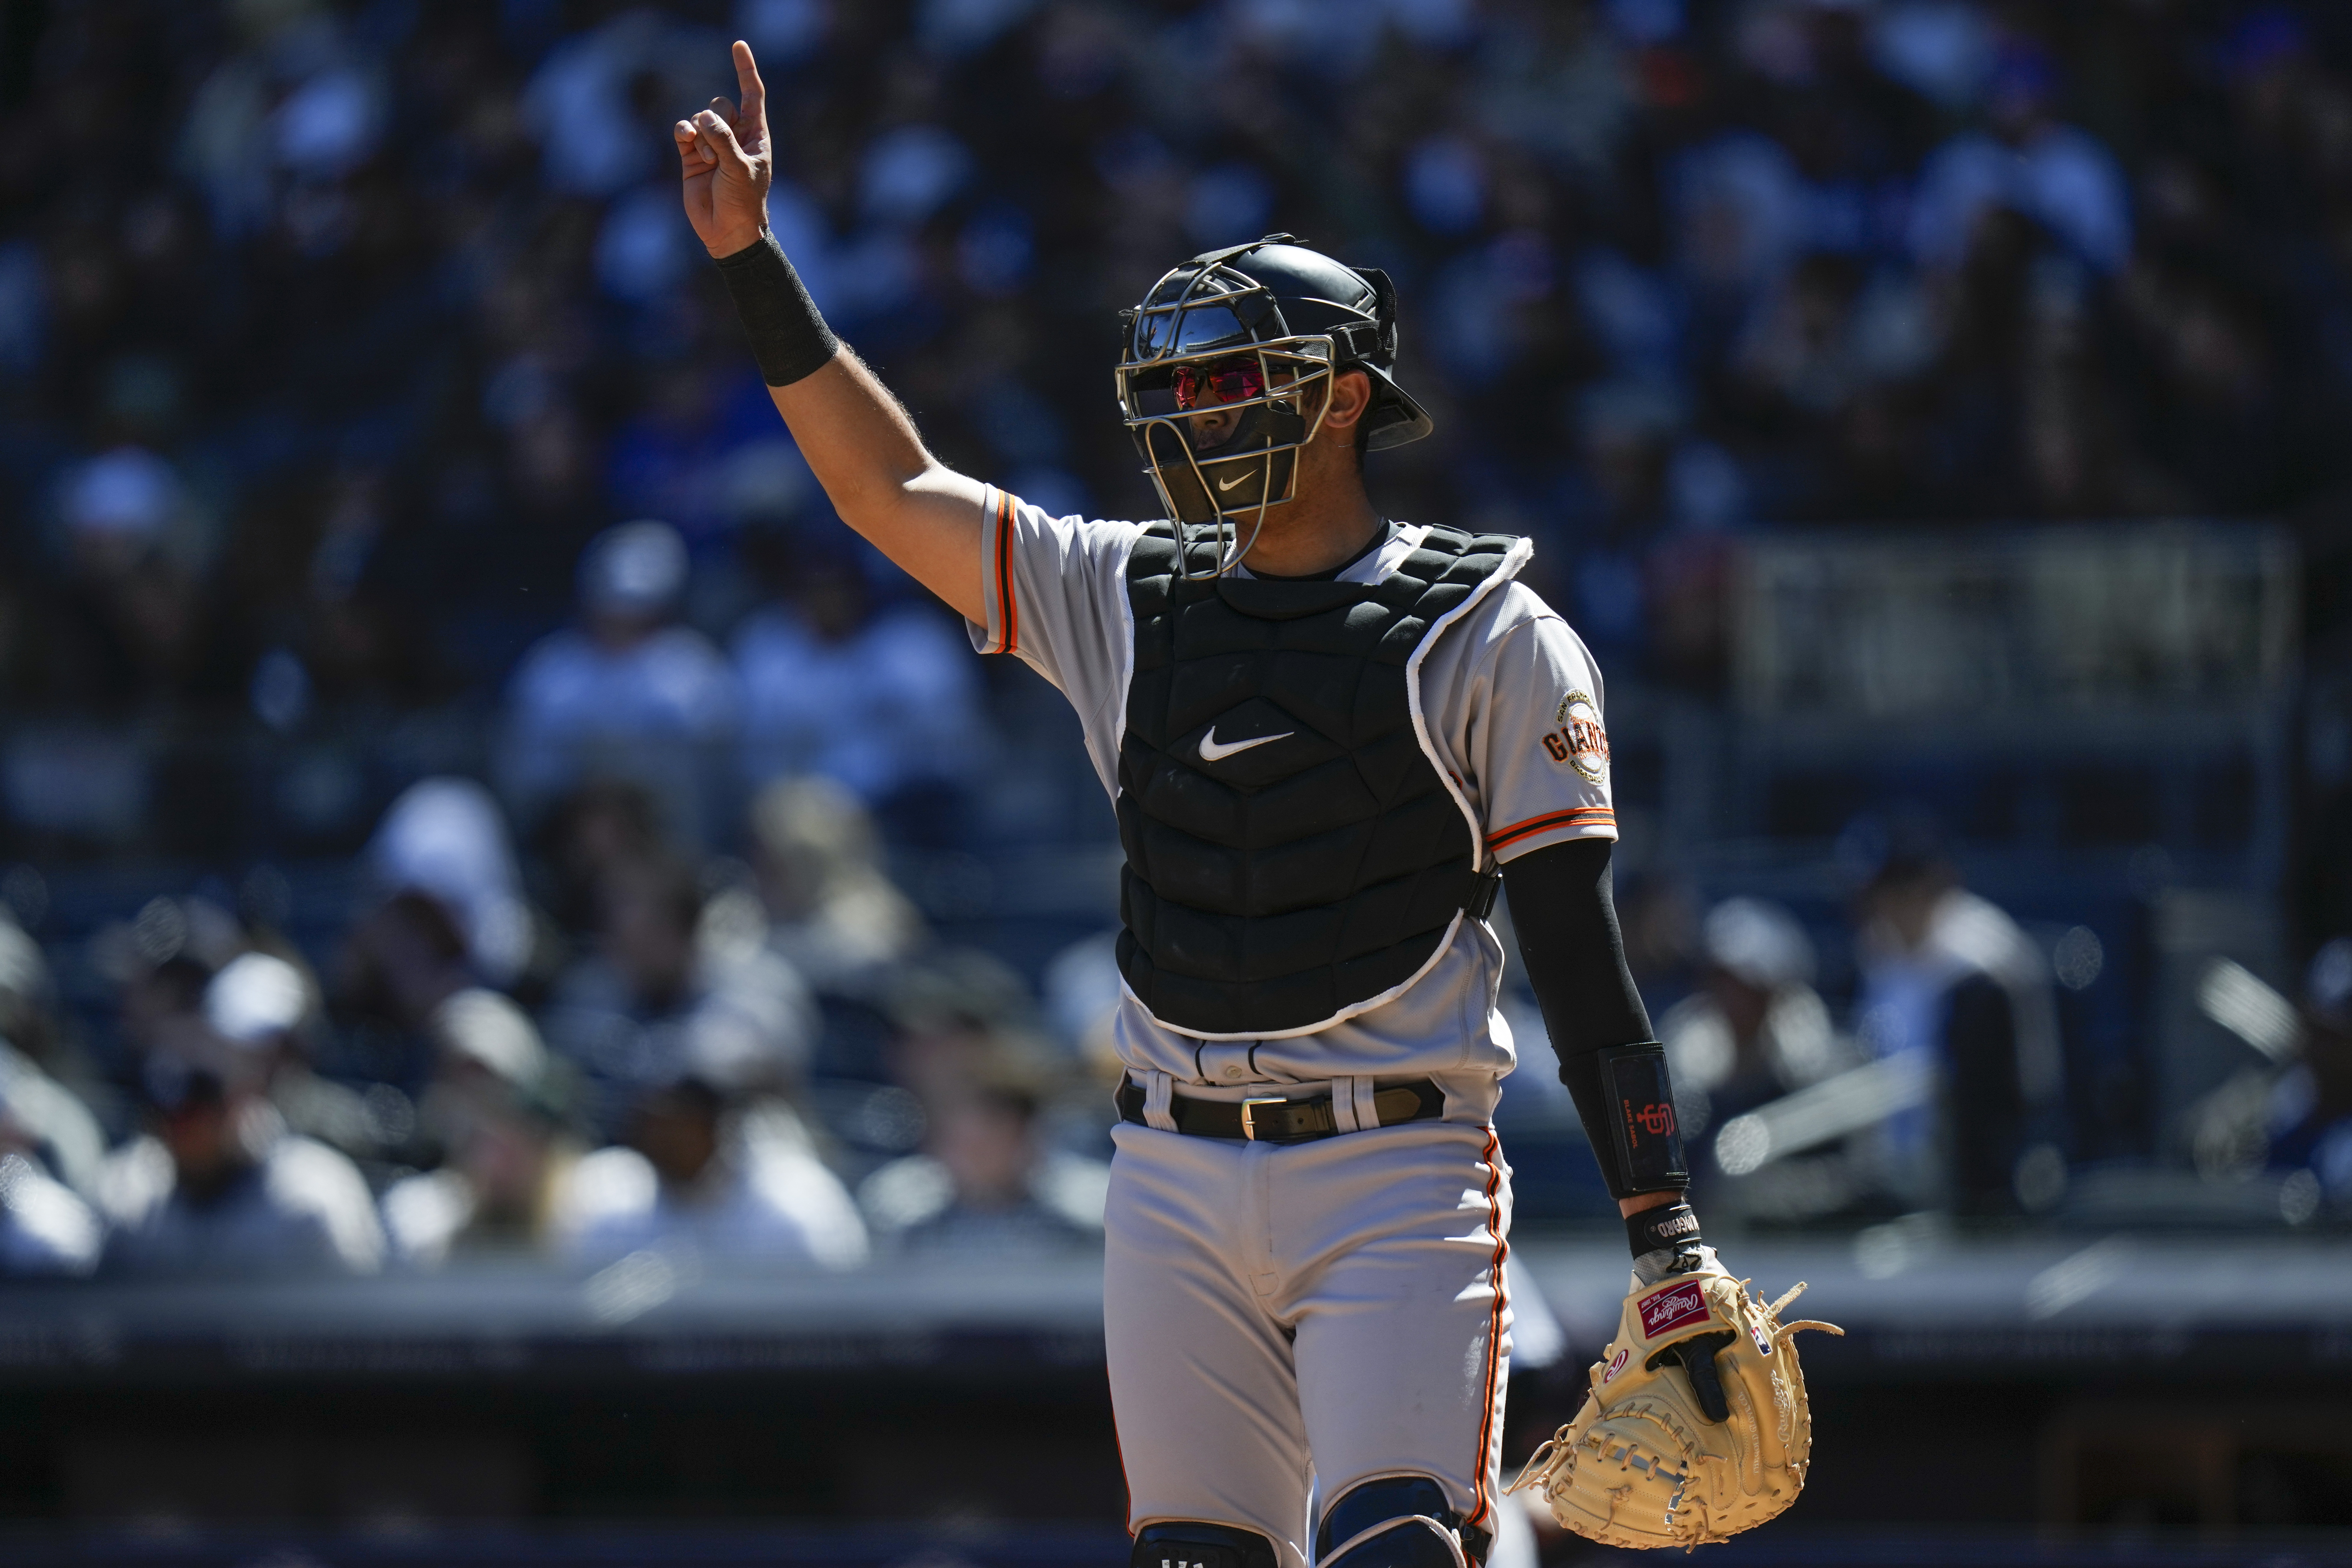 Giancarlo Stanton crushed a 504-foot home run at Coors Field